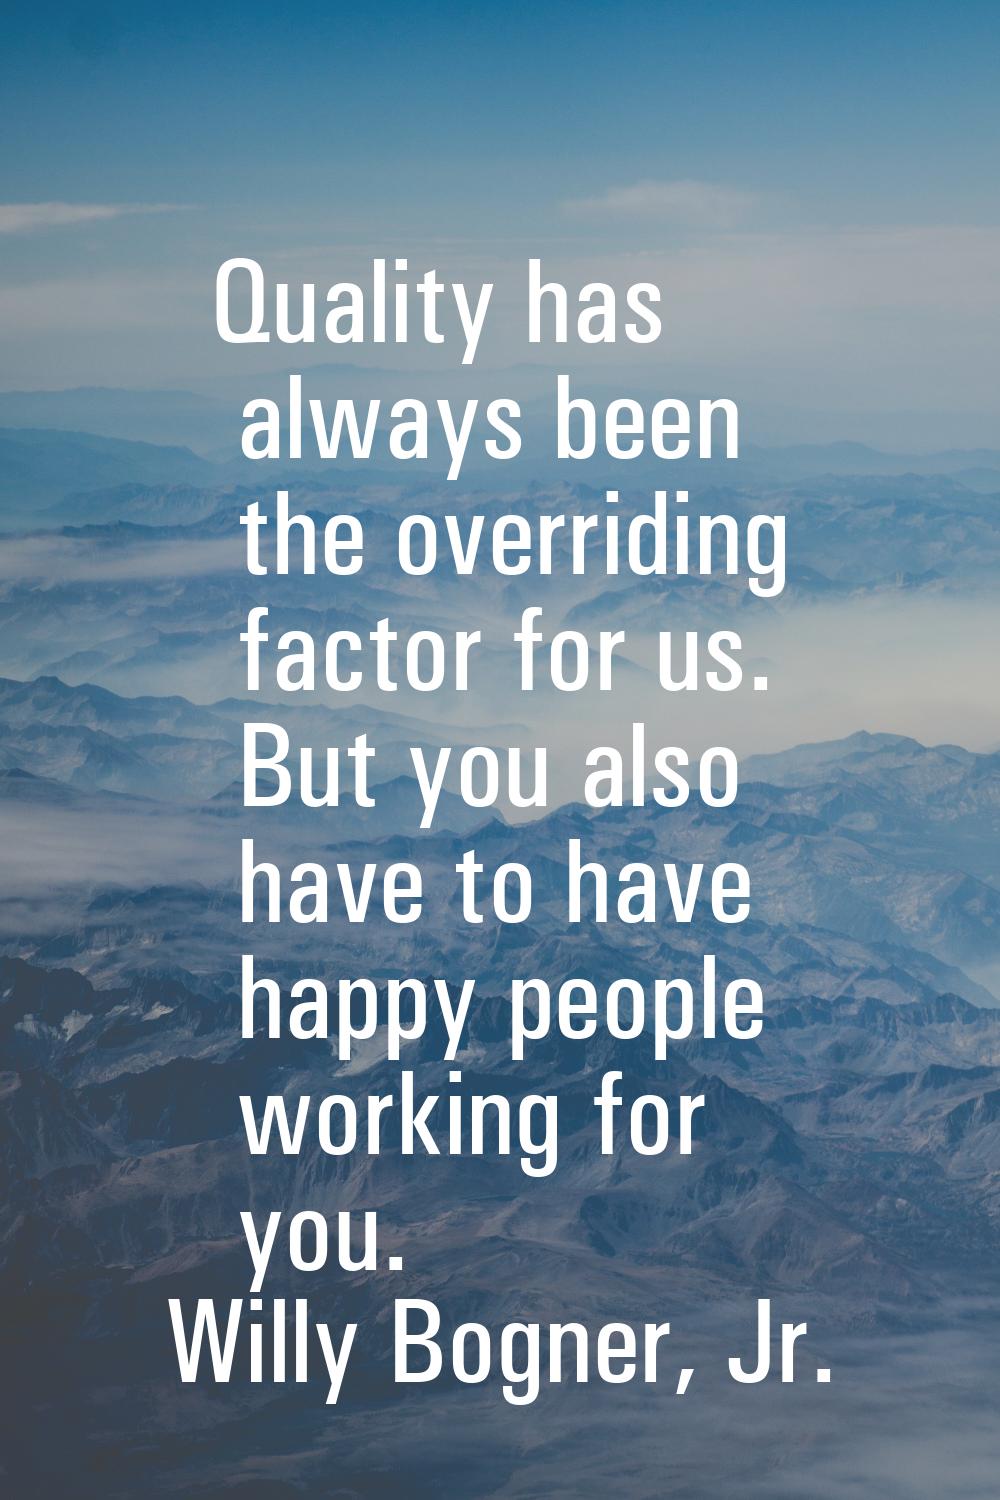 Quality has always been the overriding factor for us. But you also have to have happy people workin